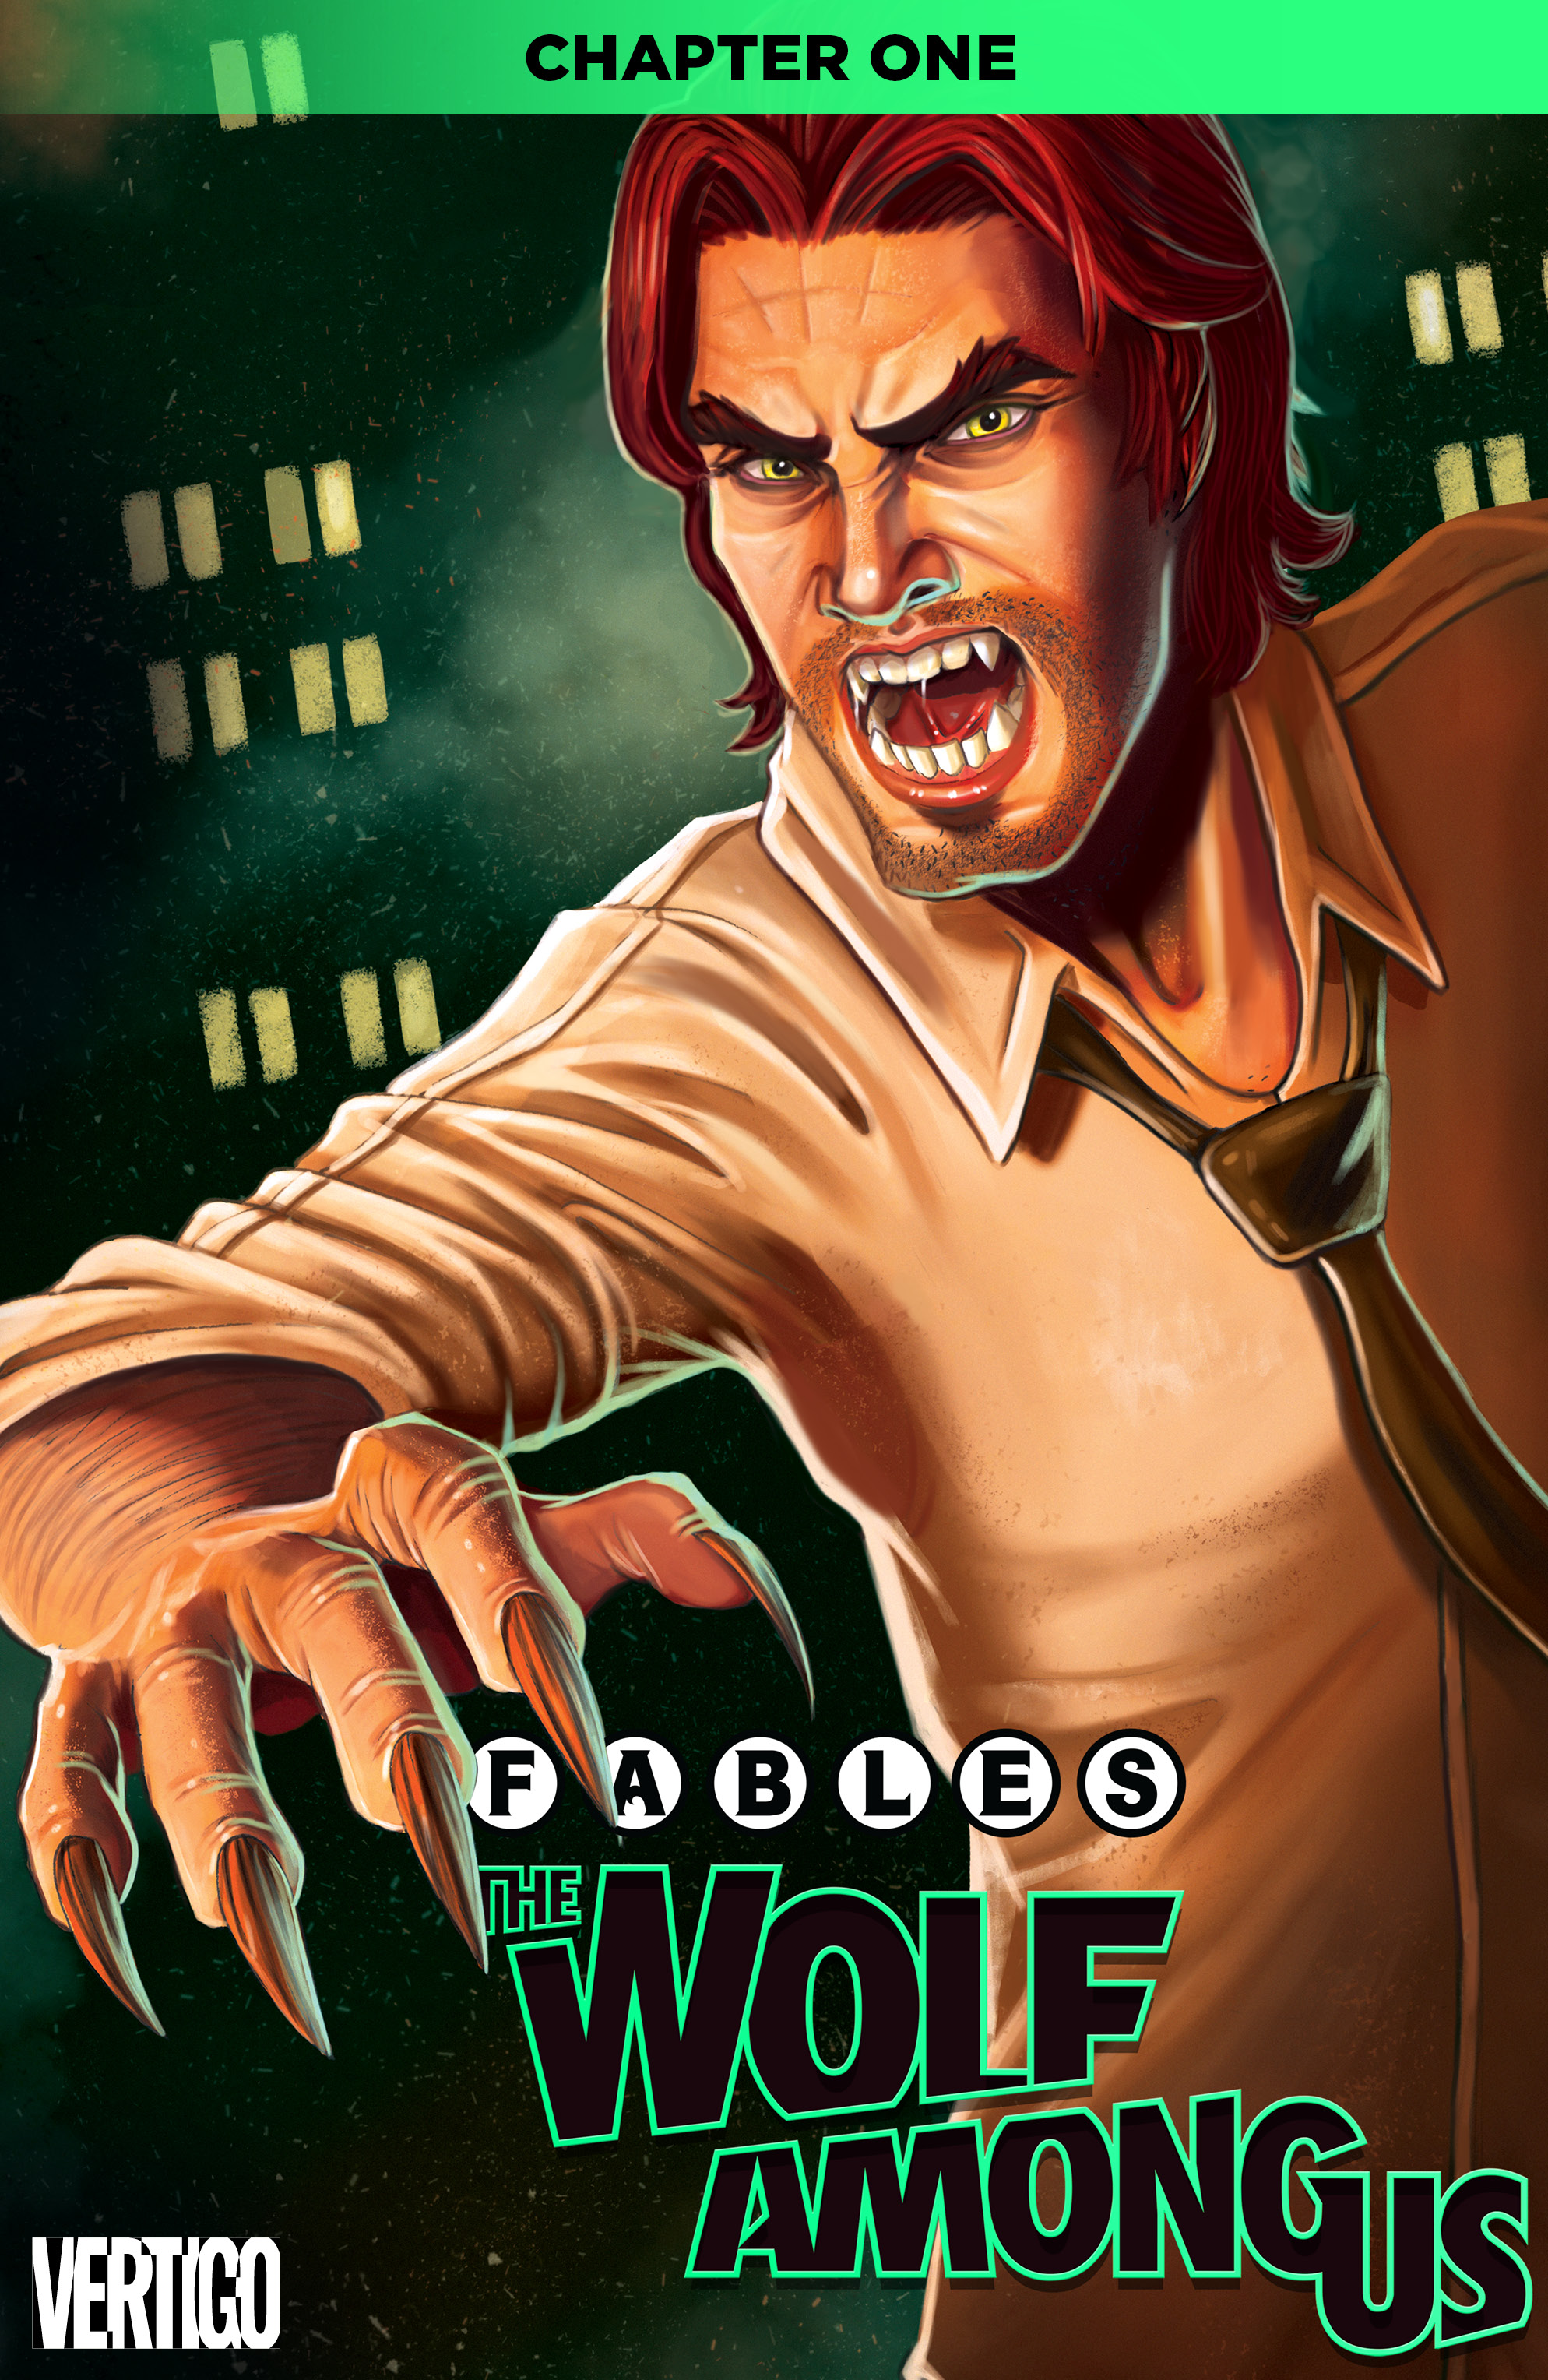 Fables: The Wolf Among Us #1 preview images